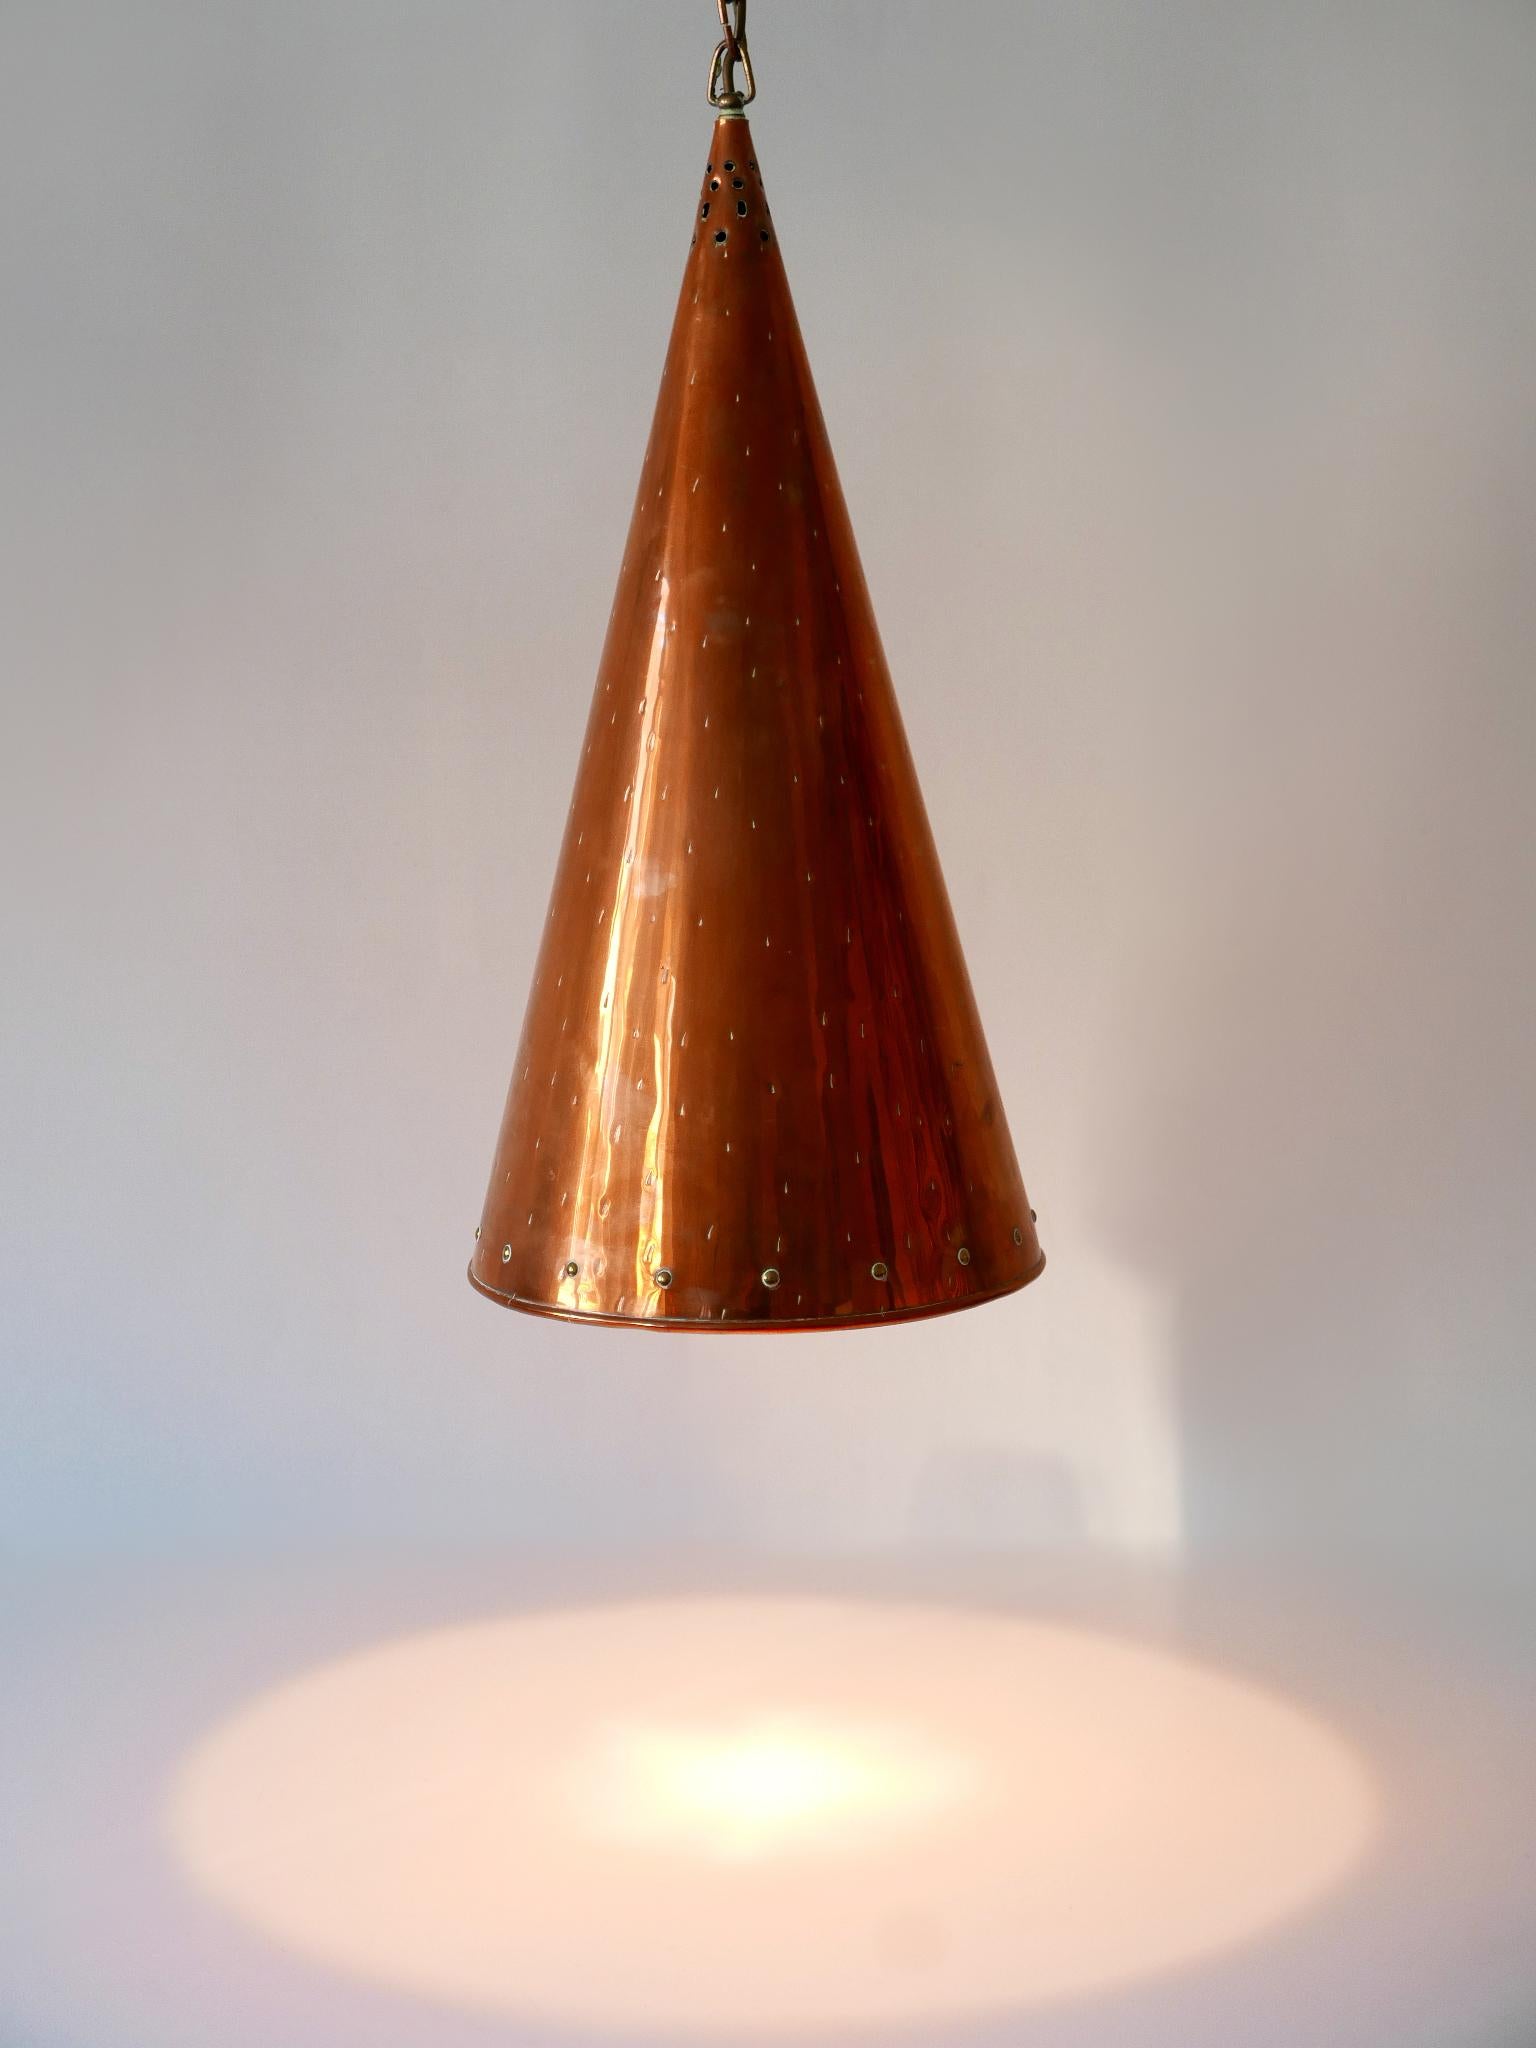 XL Mid Century Modern Copper Pendant Lamp by E.S. Horn Aalestrup Denmark 1950s For Sale 4